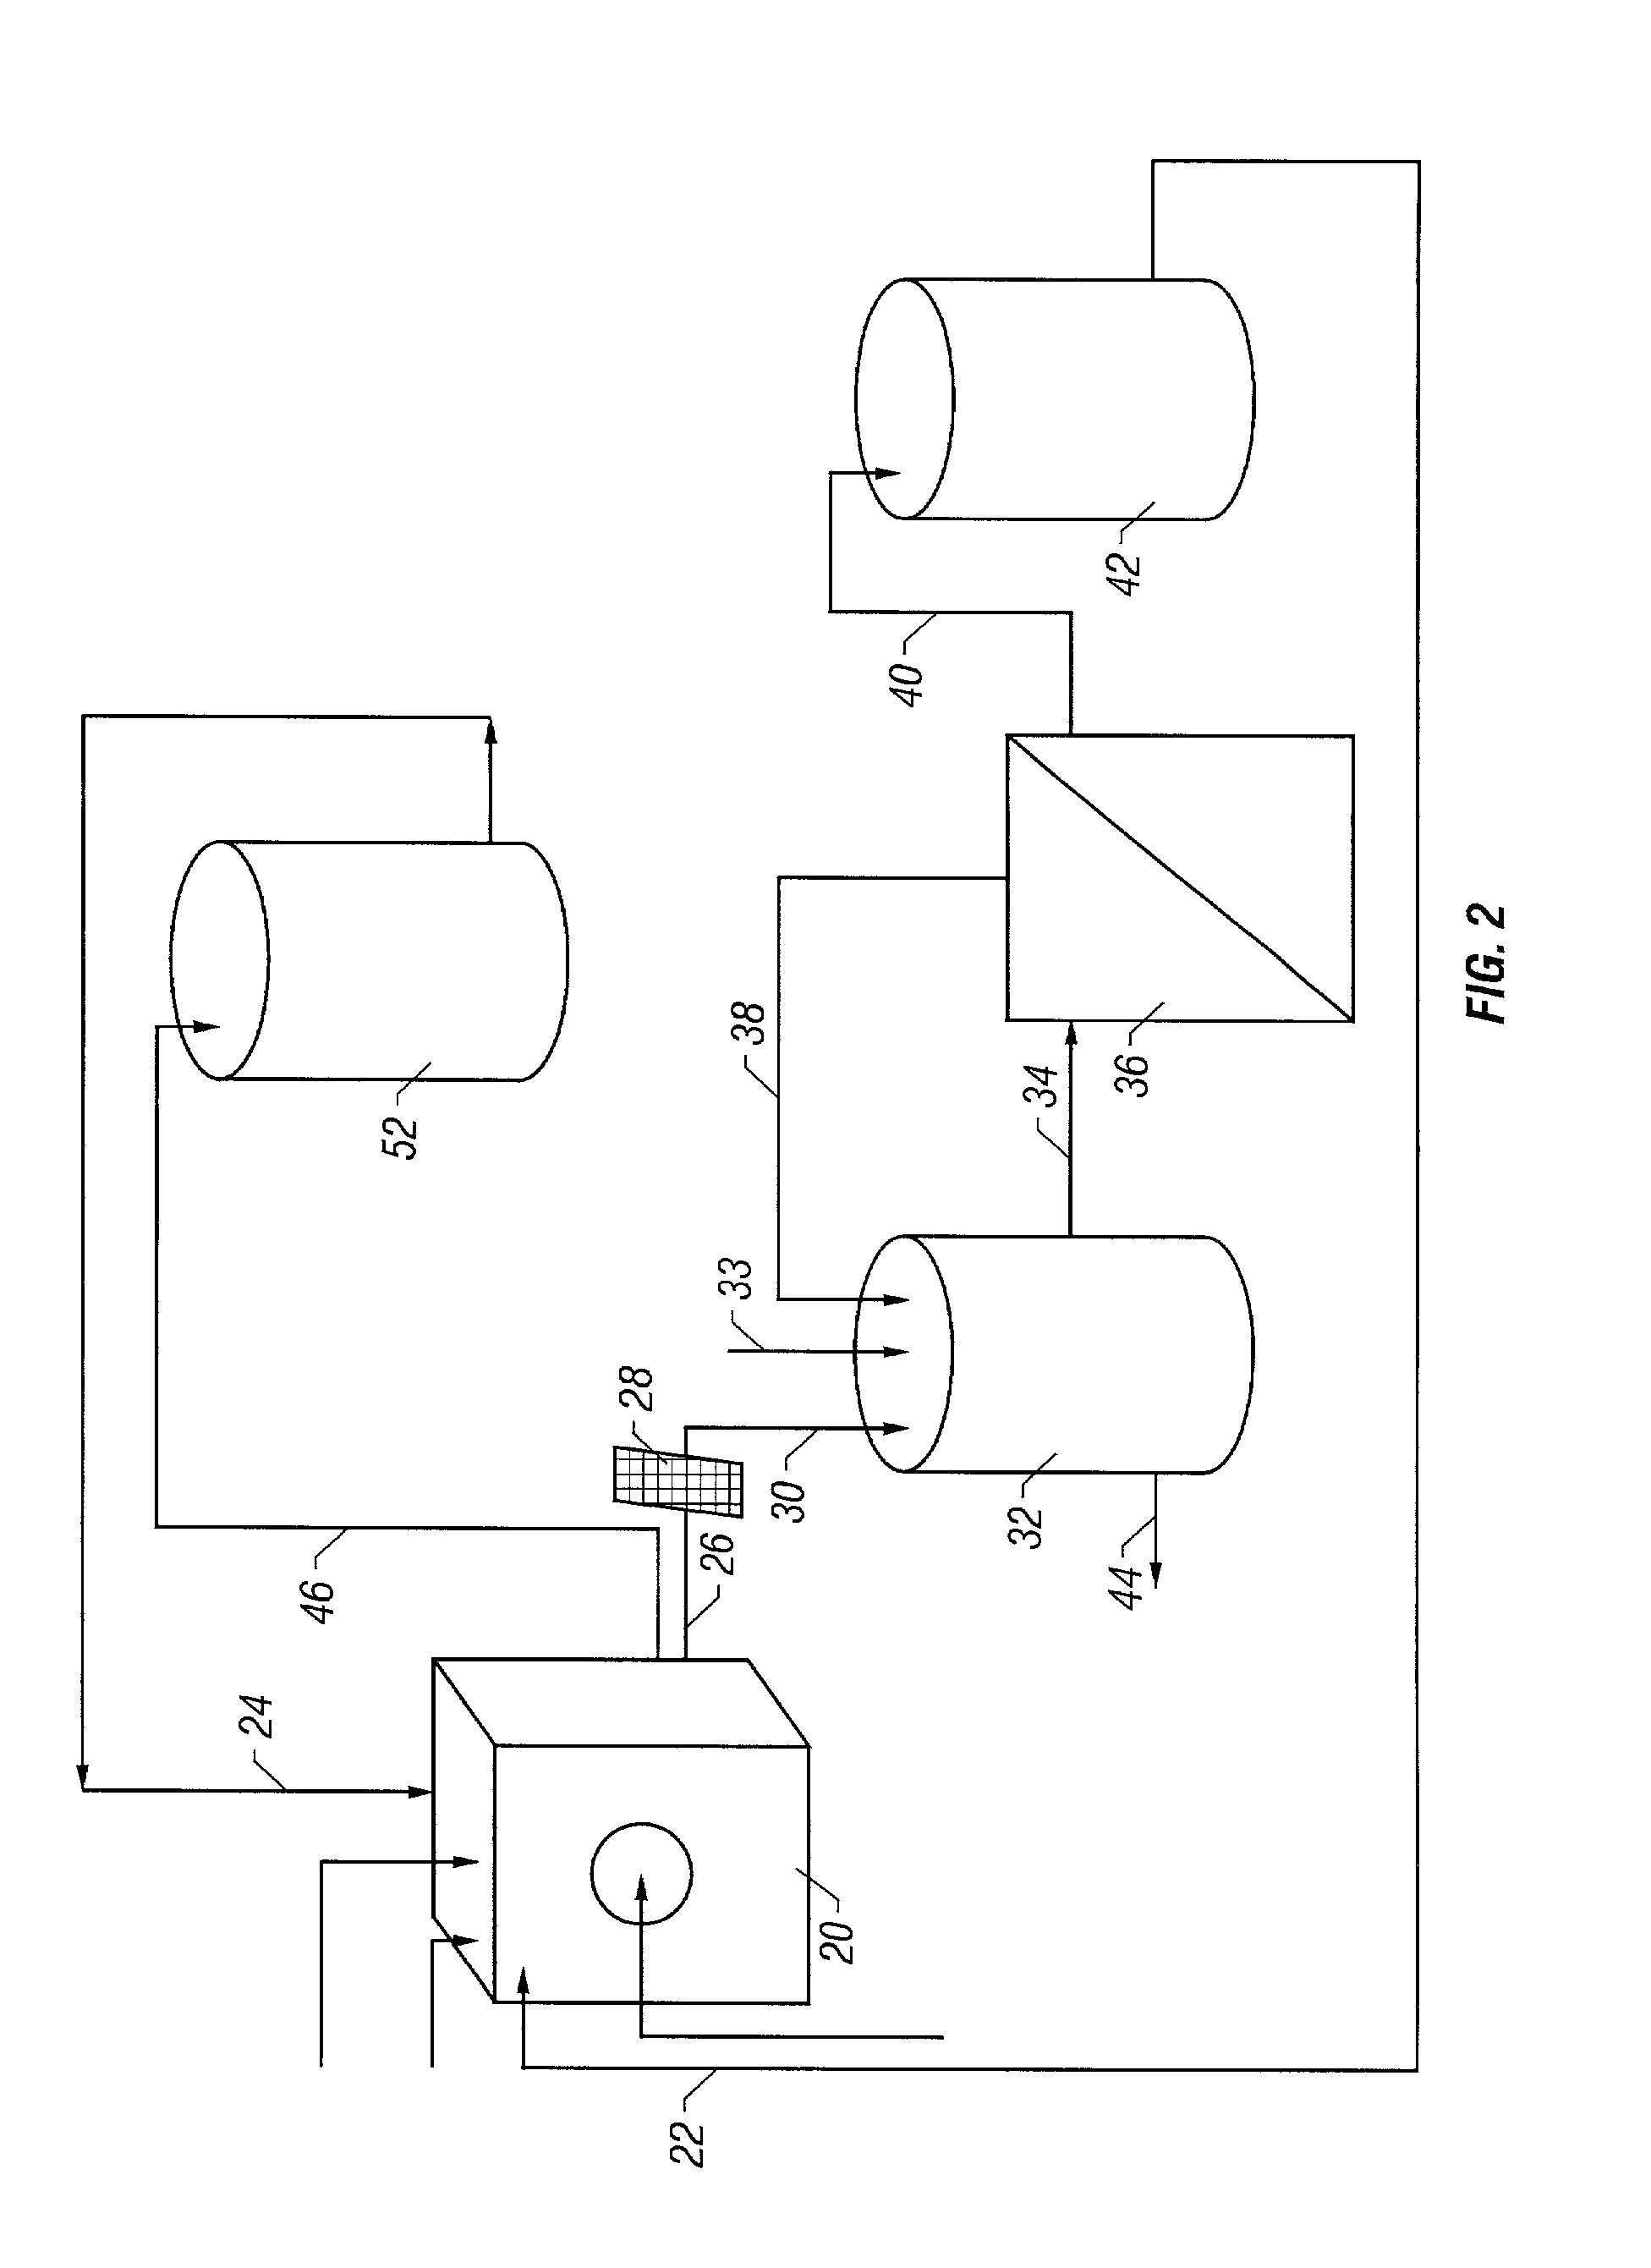 System and method for economically viable and environmentally friendly central processing of home laundry